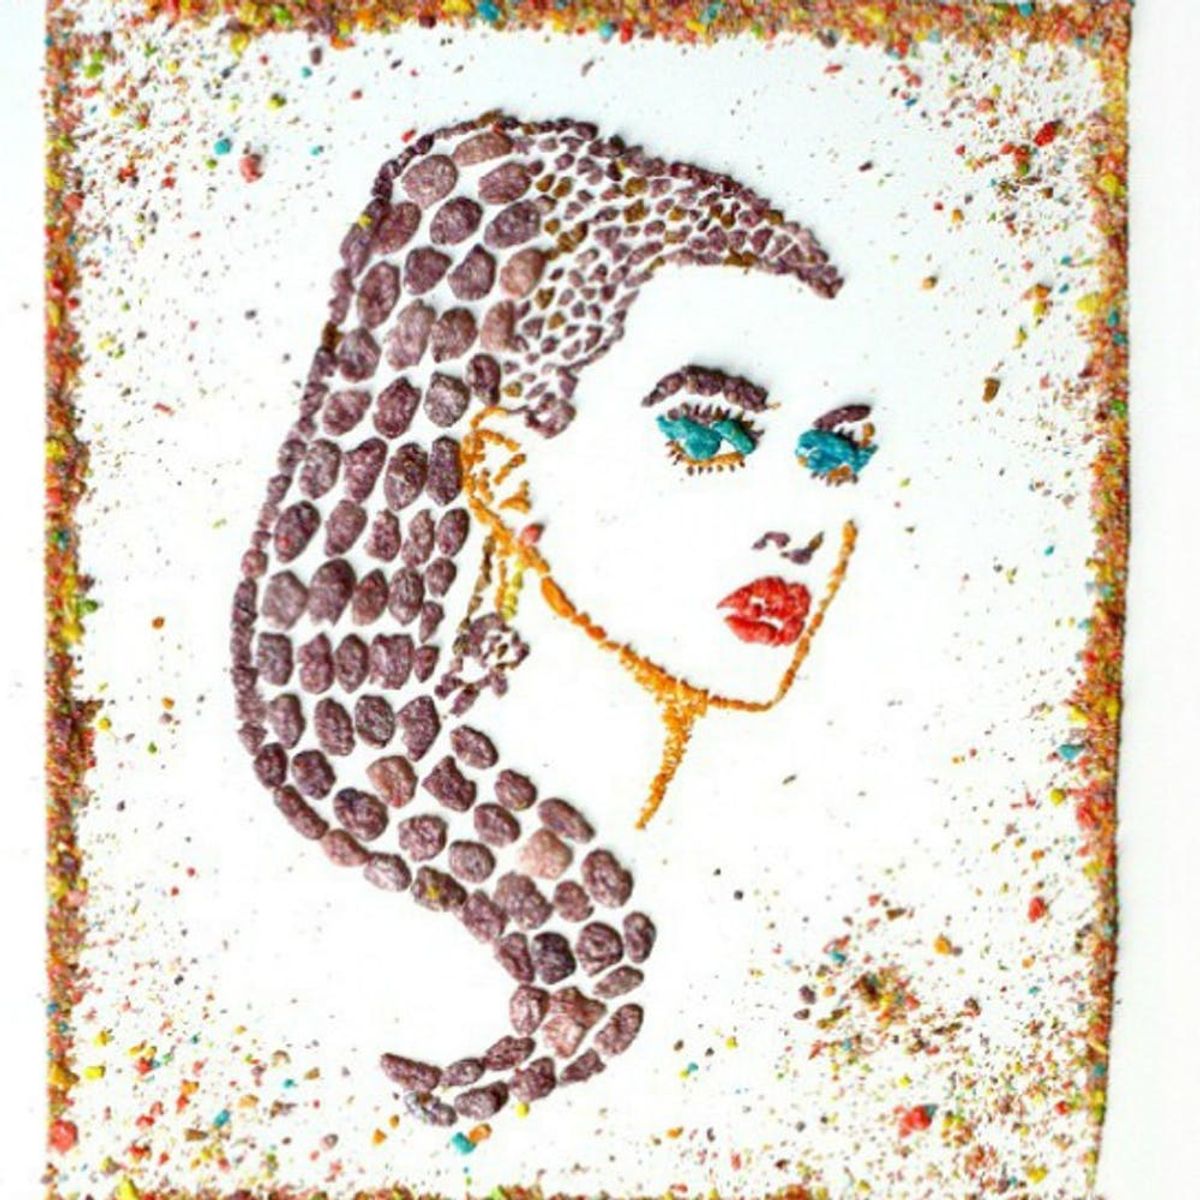 This Artist Makes LOL-Worthy Celeb Portraits Out of Cereal